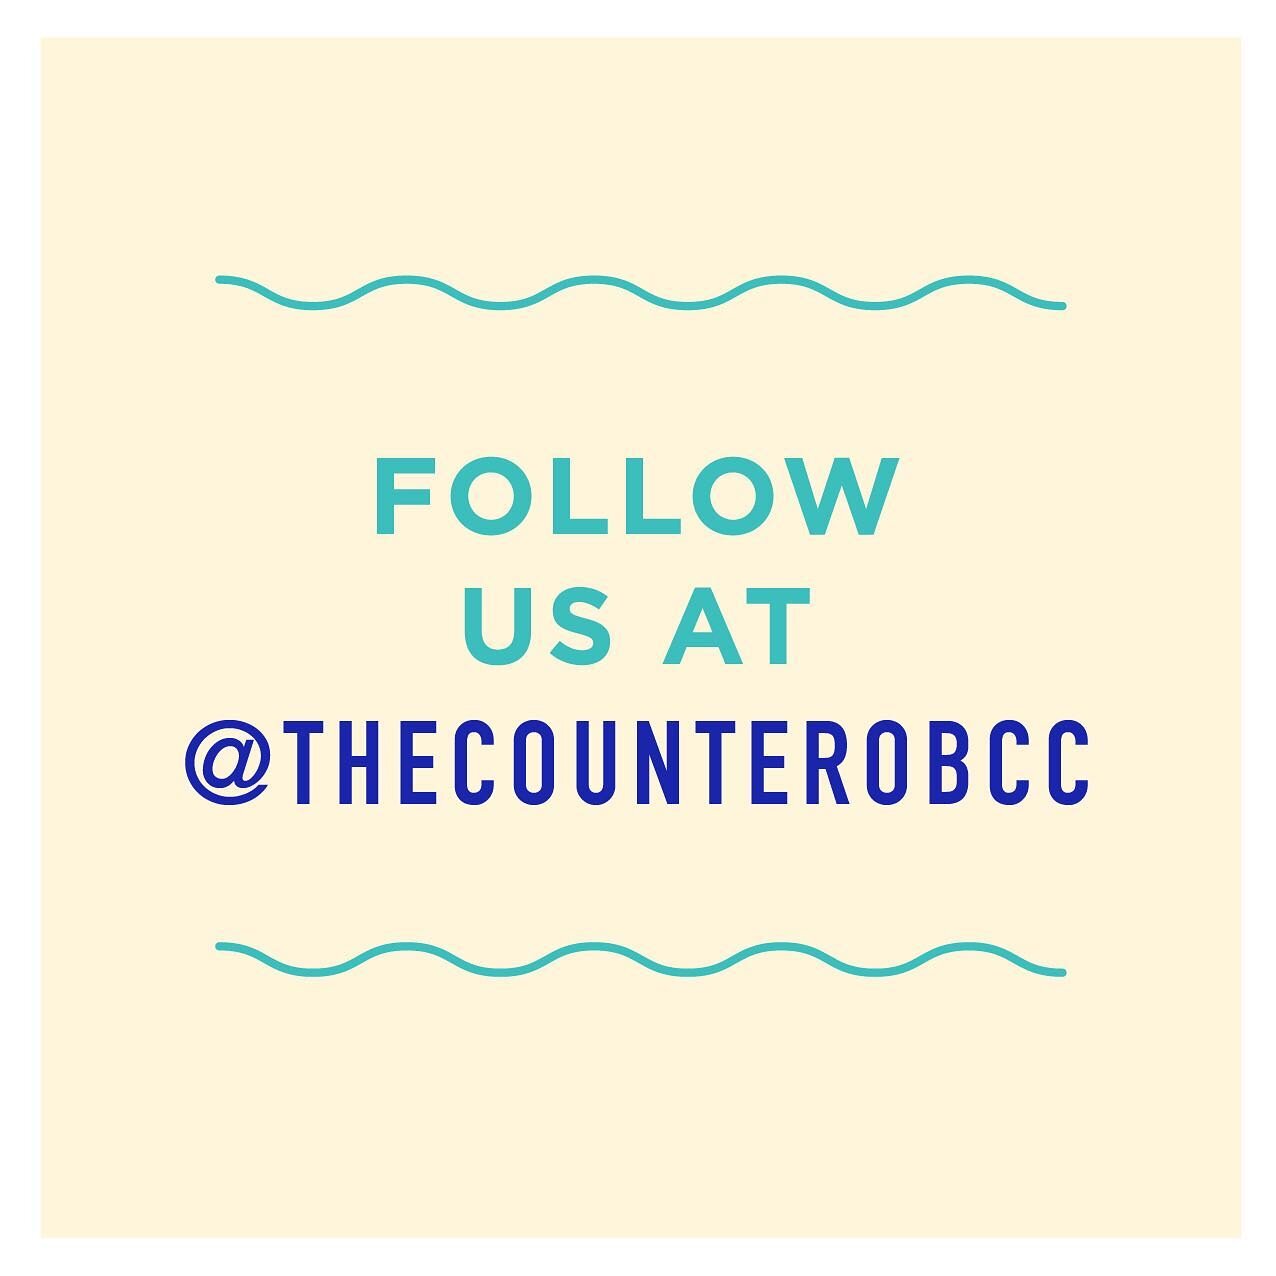 It&rsquo;s the freakin&rsquo; weekend! Finally! Remember to follow our take out counter - @thecounterobcc - for all your weekend needs! Global  comfort food 🌍, tasty beverages 🍺, market items 🛒 and lots of sweet stuff 🍫! &mdash;
Online Ordering ?